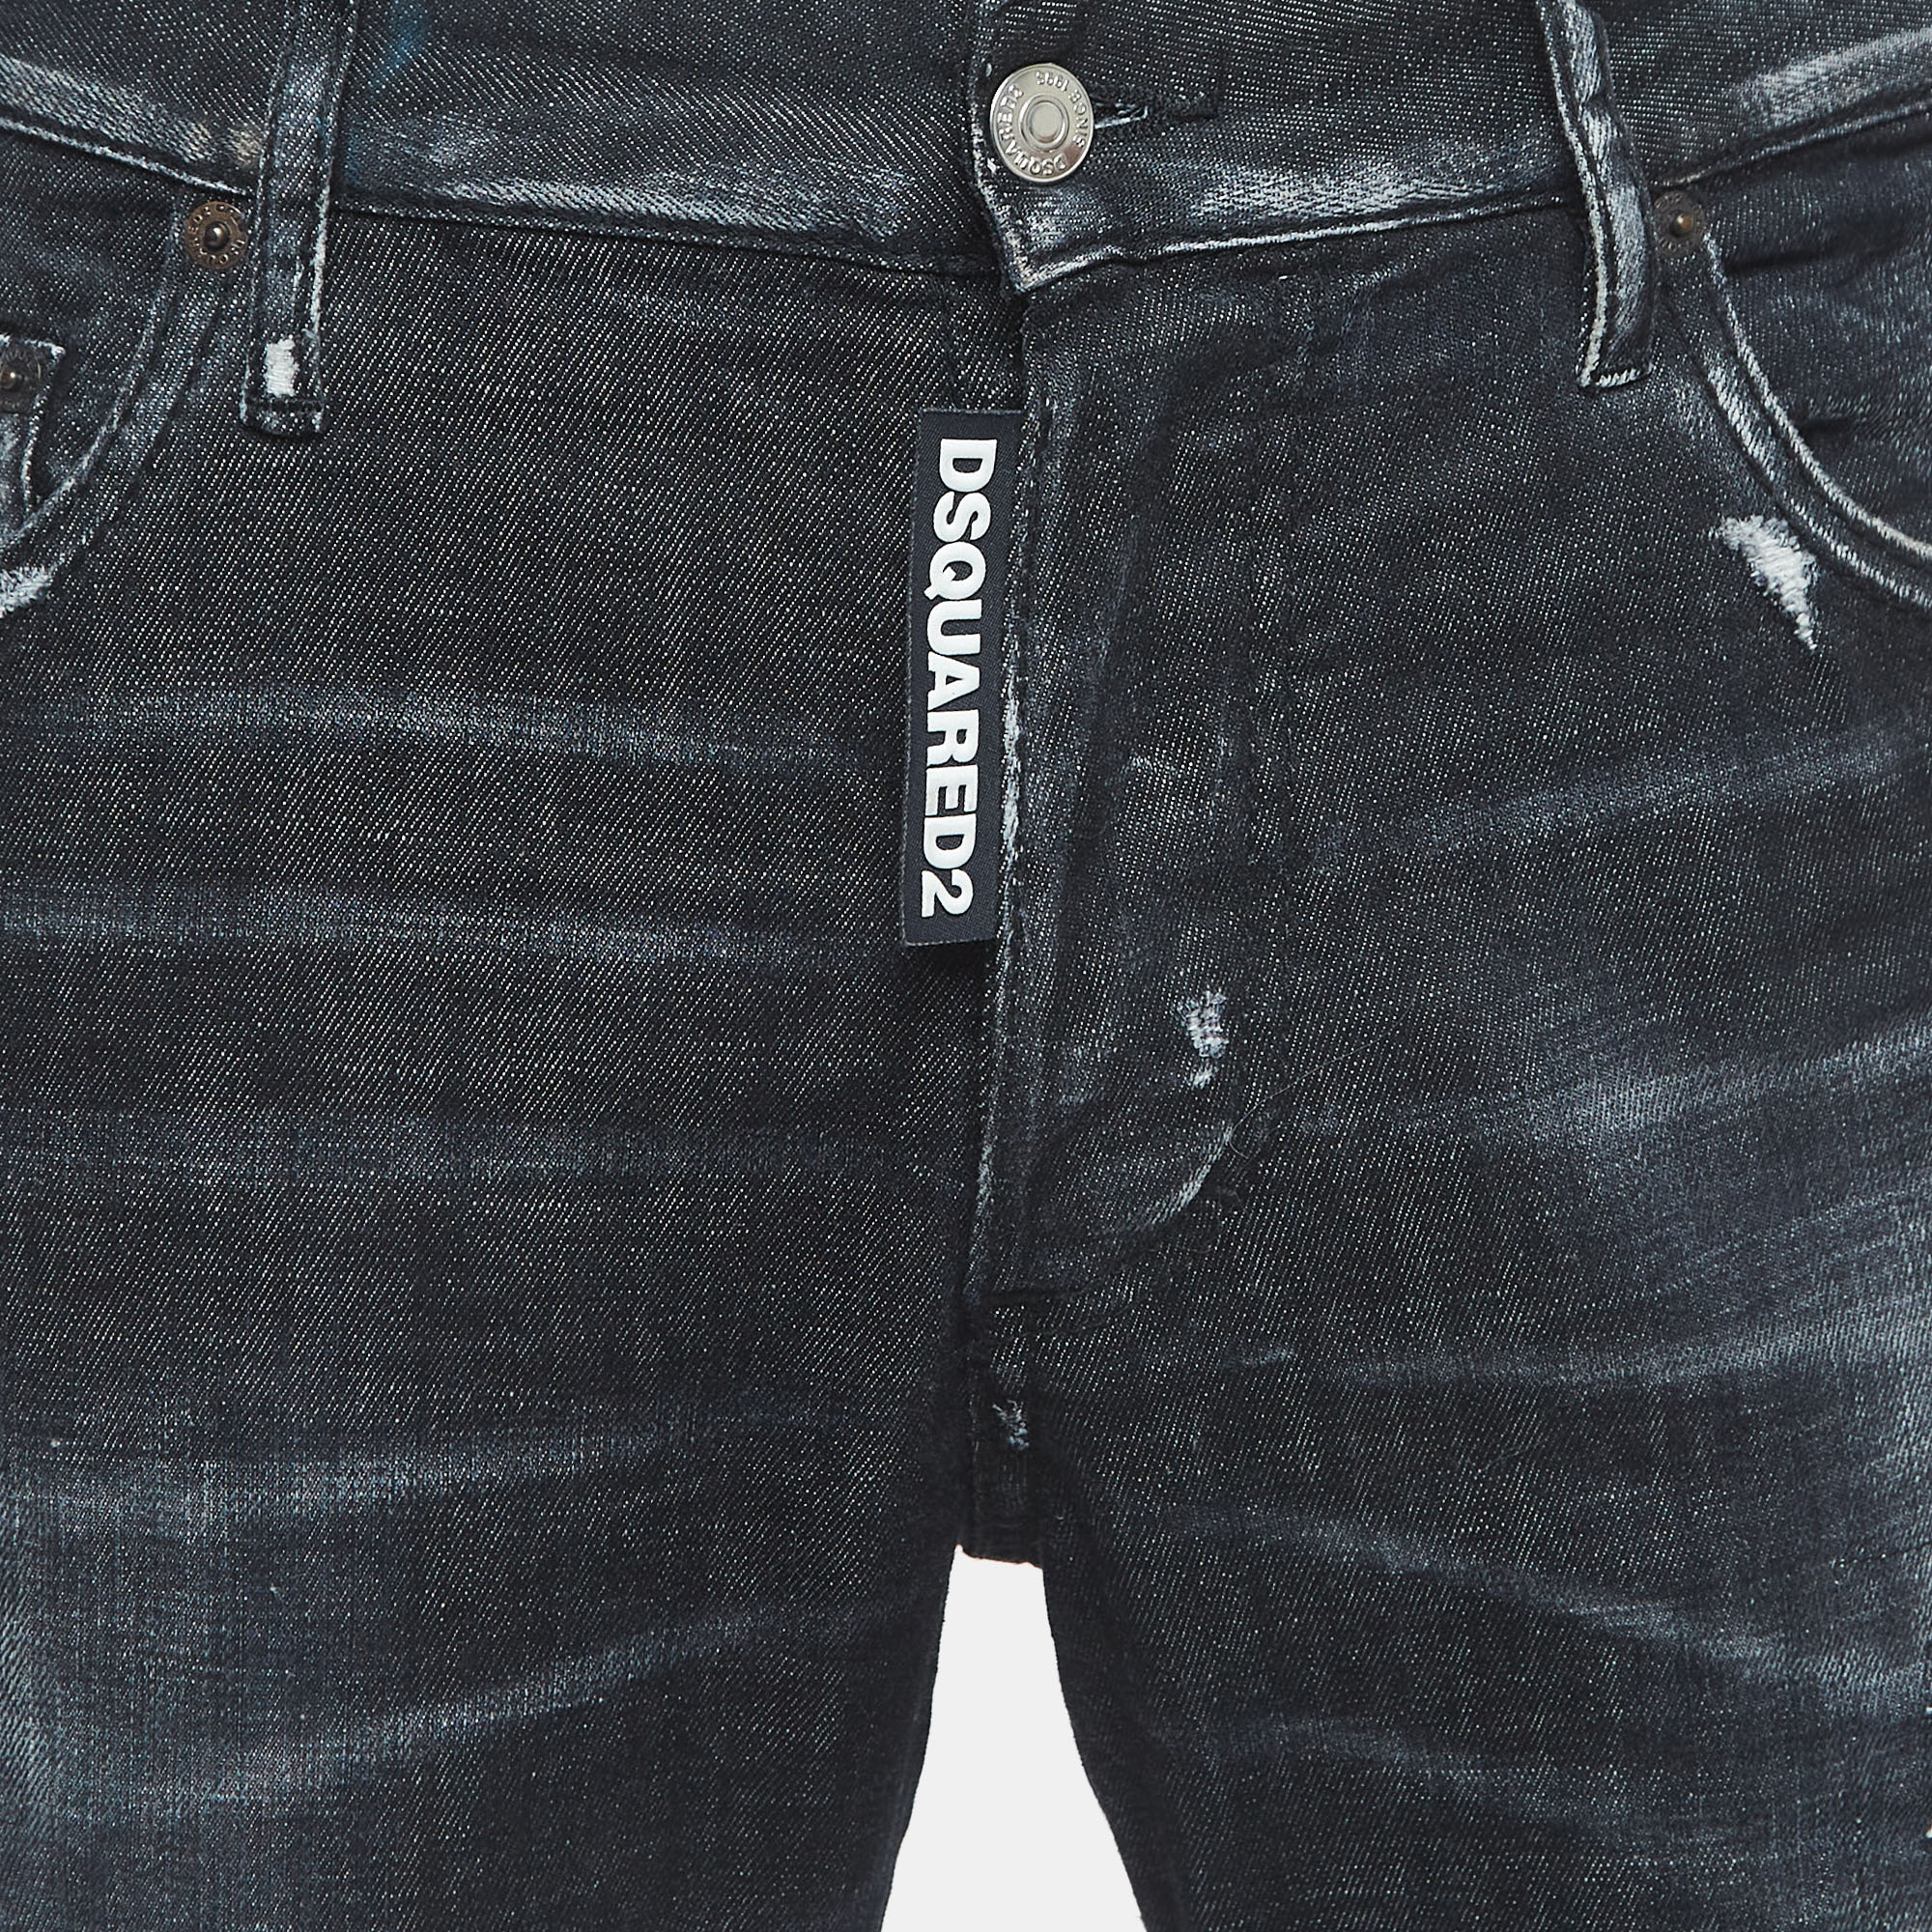 Dsquared2 Black Washed Ripped Denim Skinny Jeans M